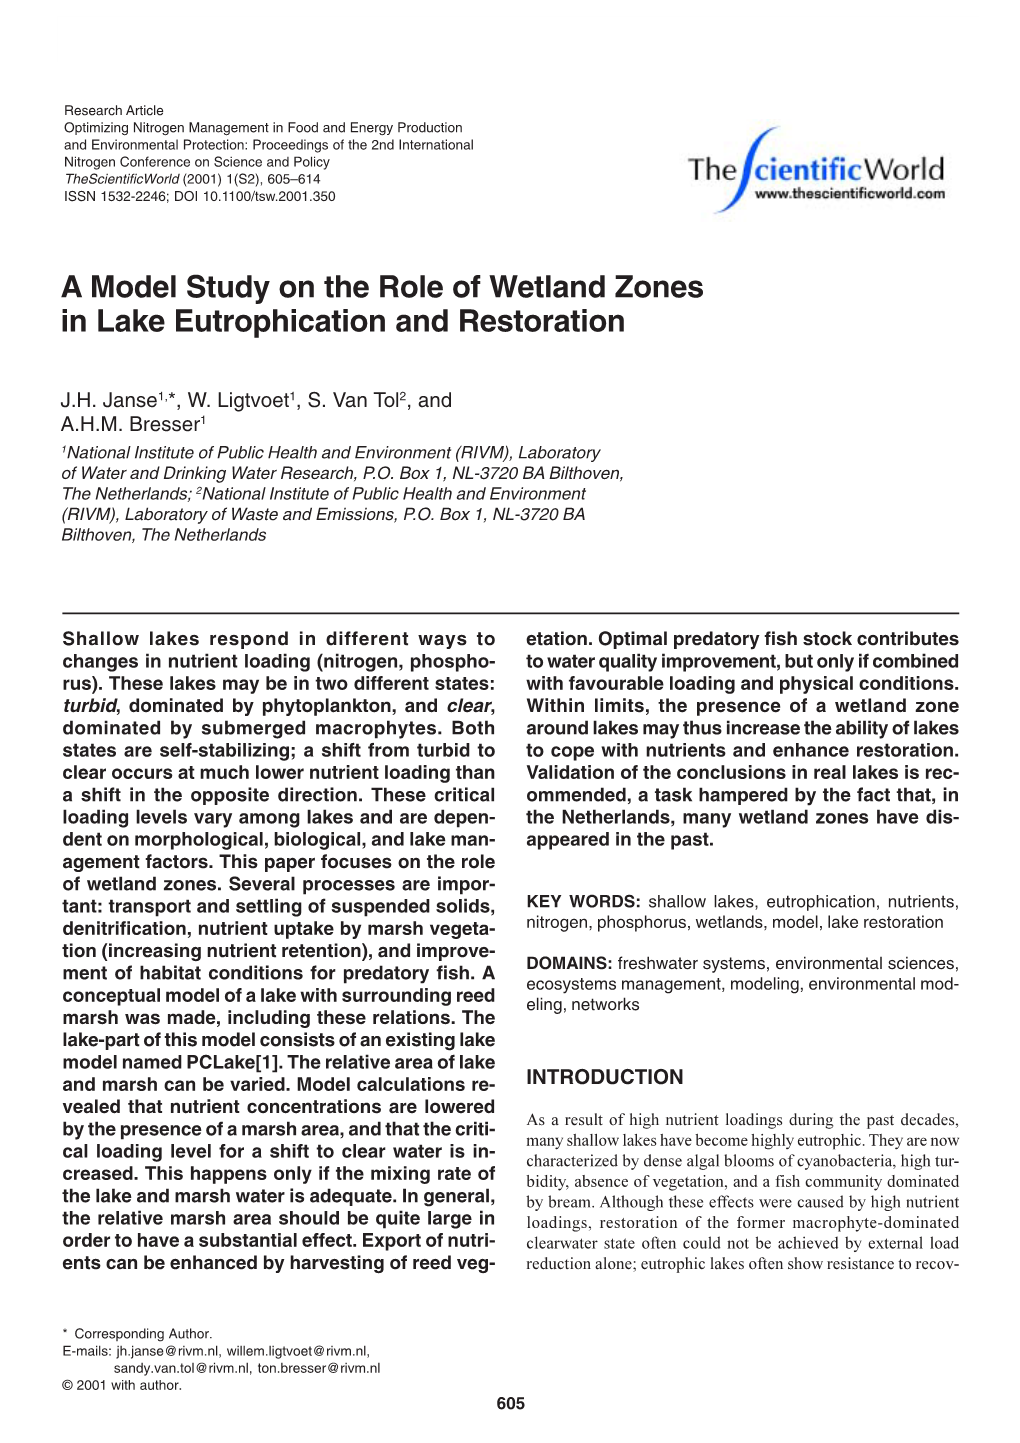 A Model Study on the Role of Wetland Zones in Lake Eutrophication and Restoration